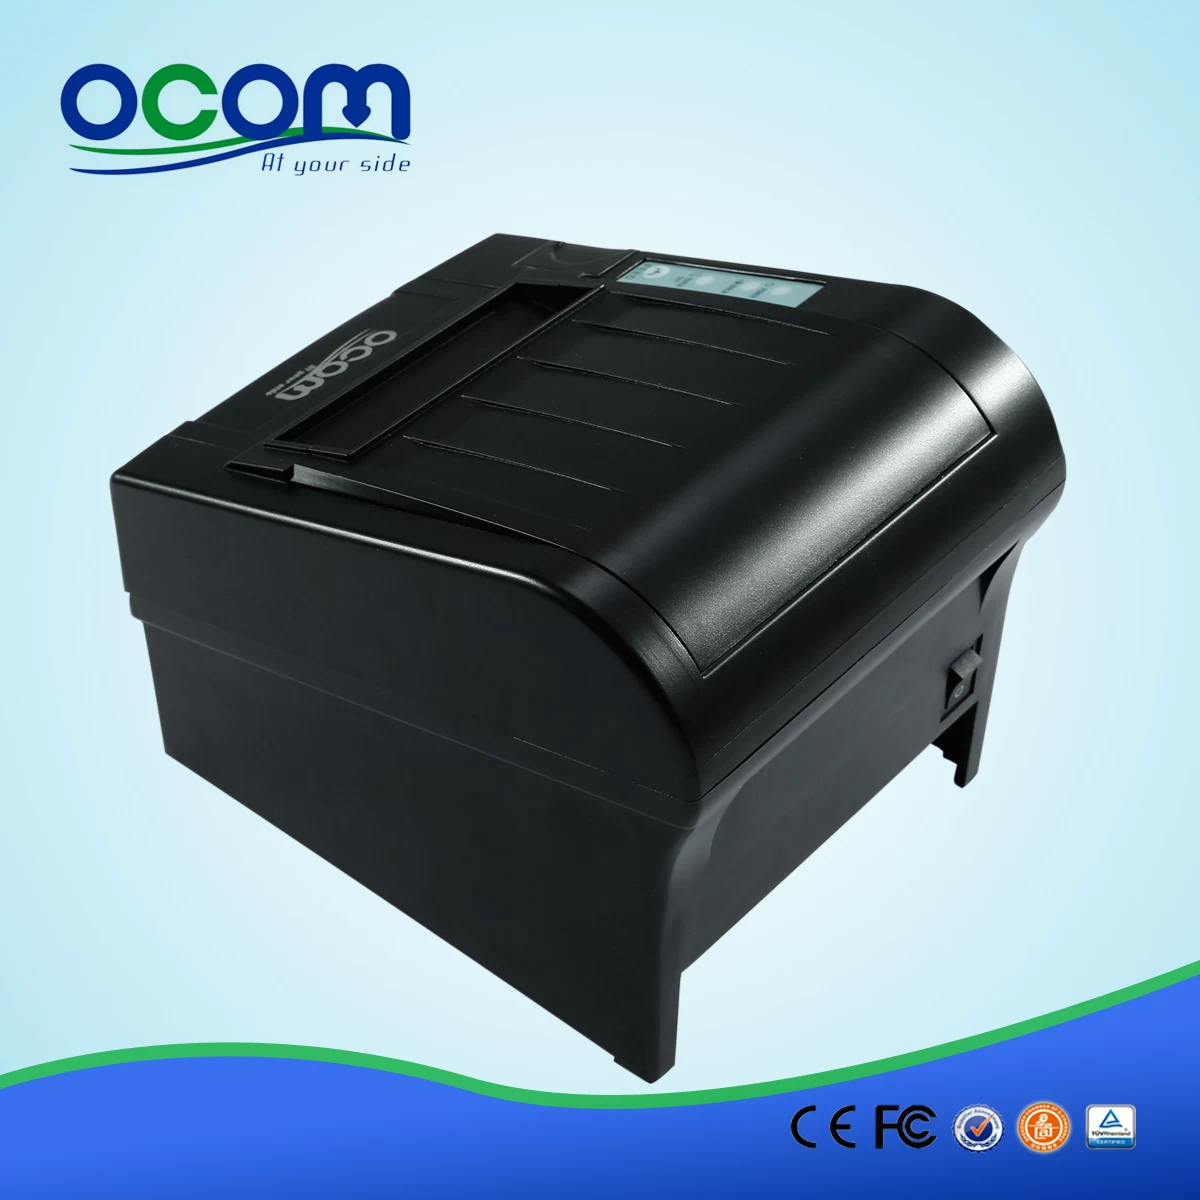 80mm WIFI Android Thermal Receipt Printer--OCPP-806-W